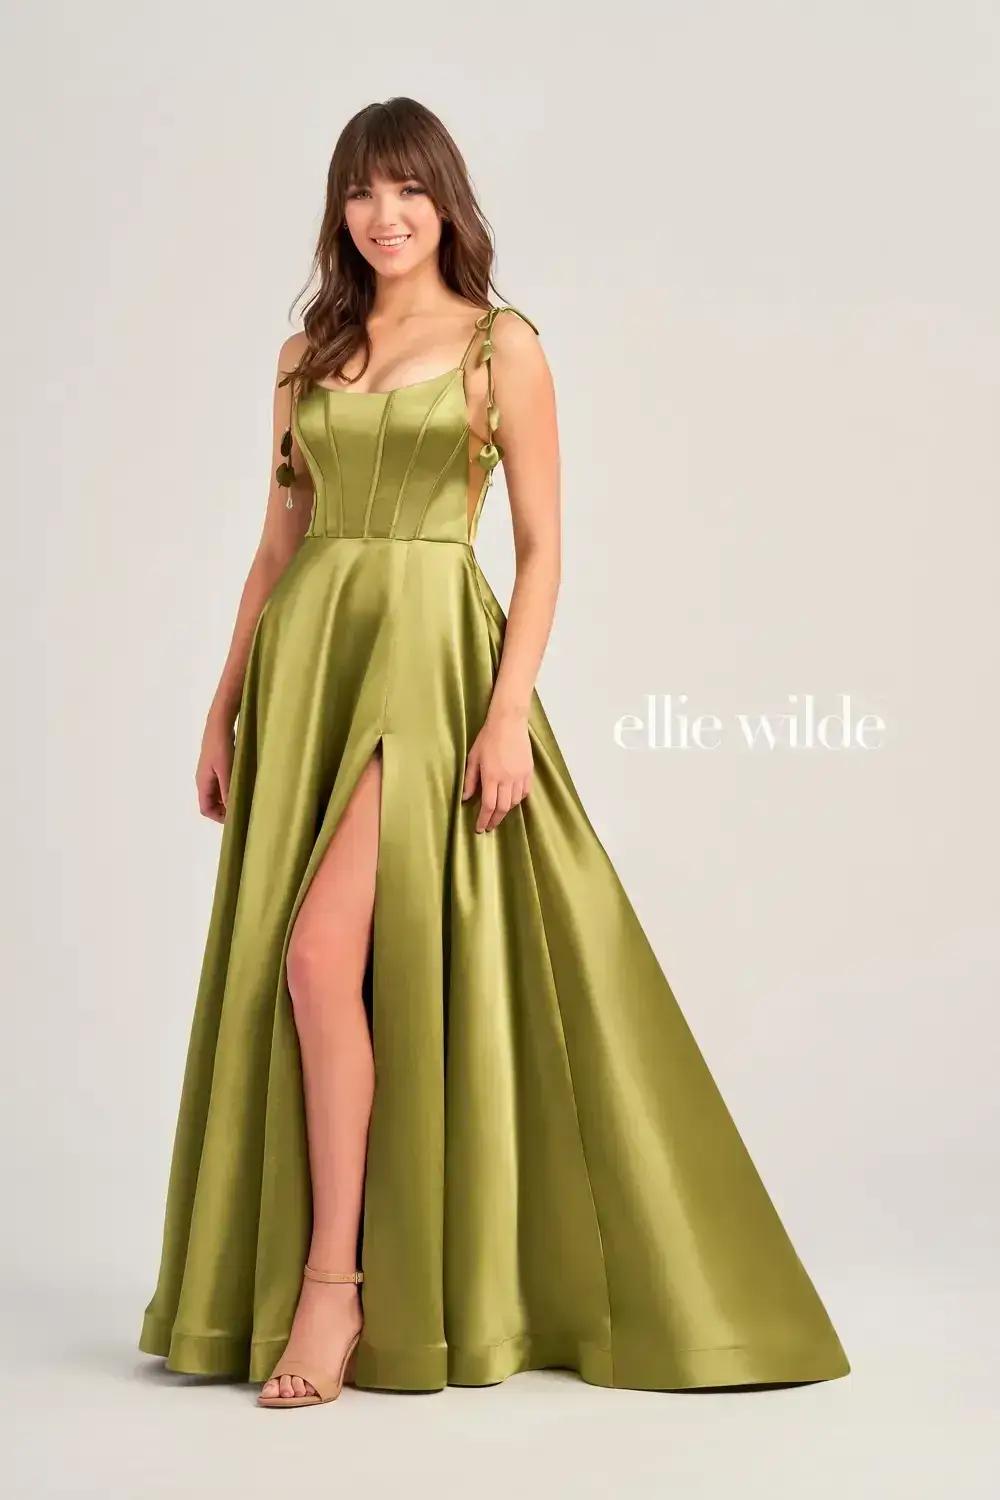 Blossoming Trends: A Sneak Peek at Spring Prom 2024 Dress Styles Image